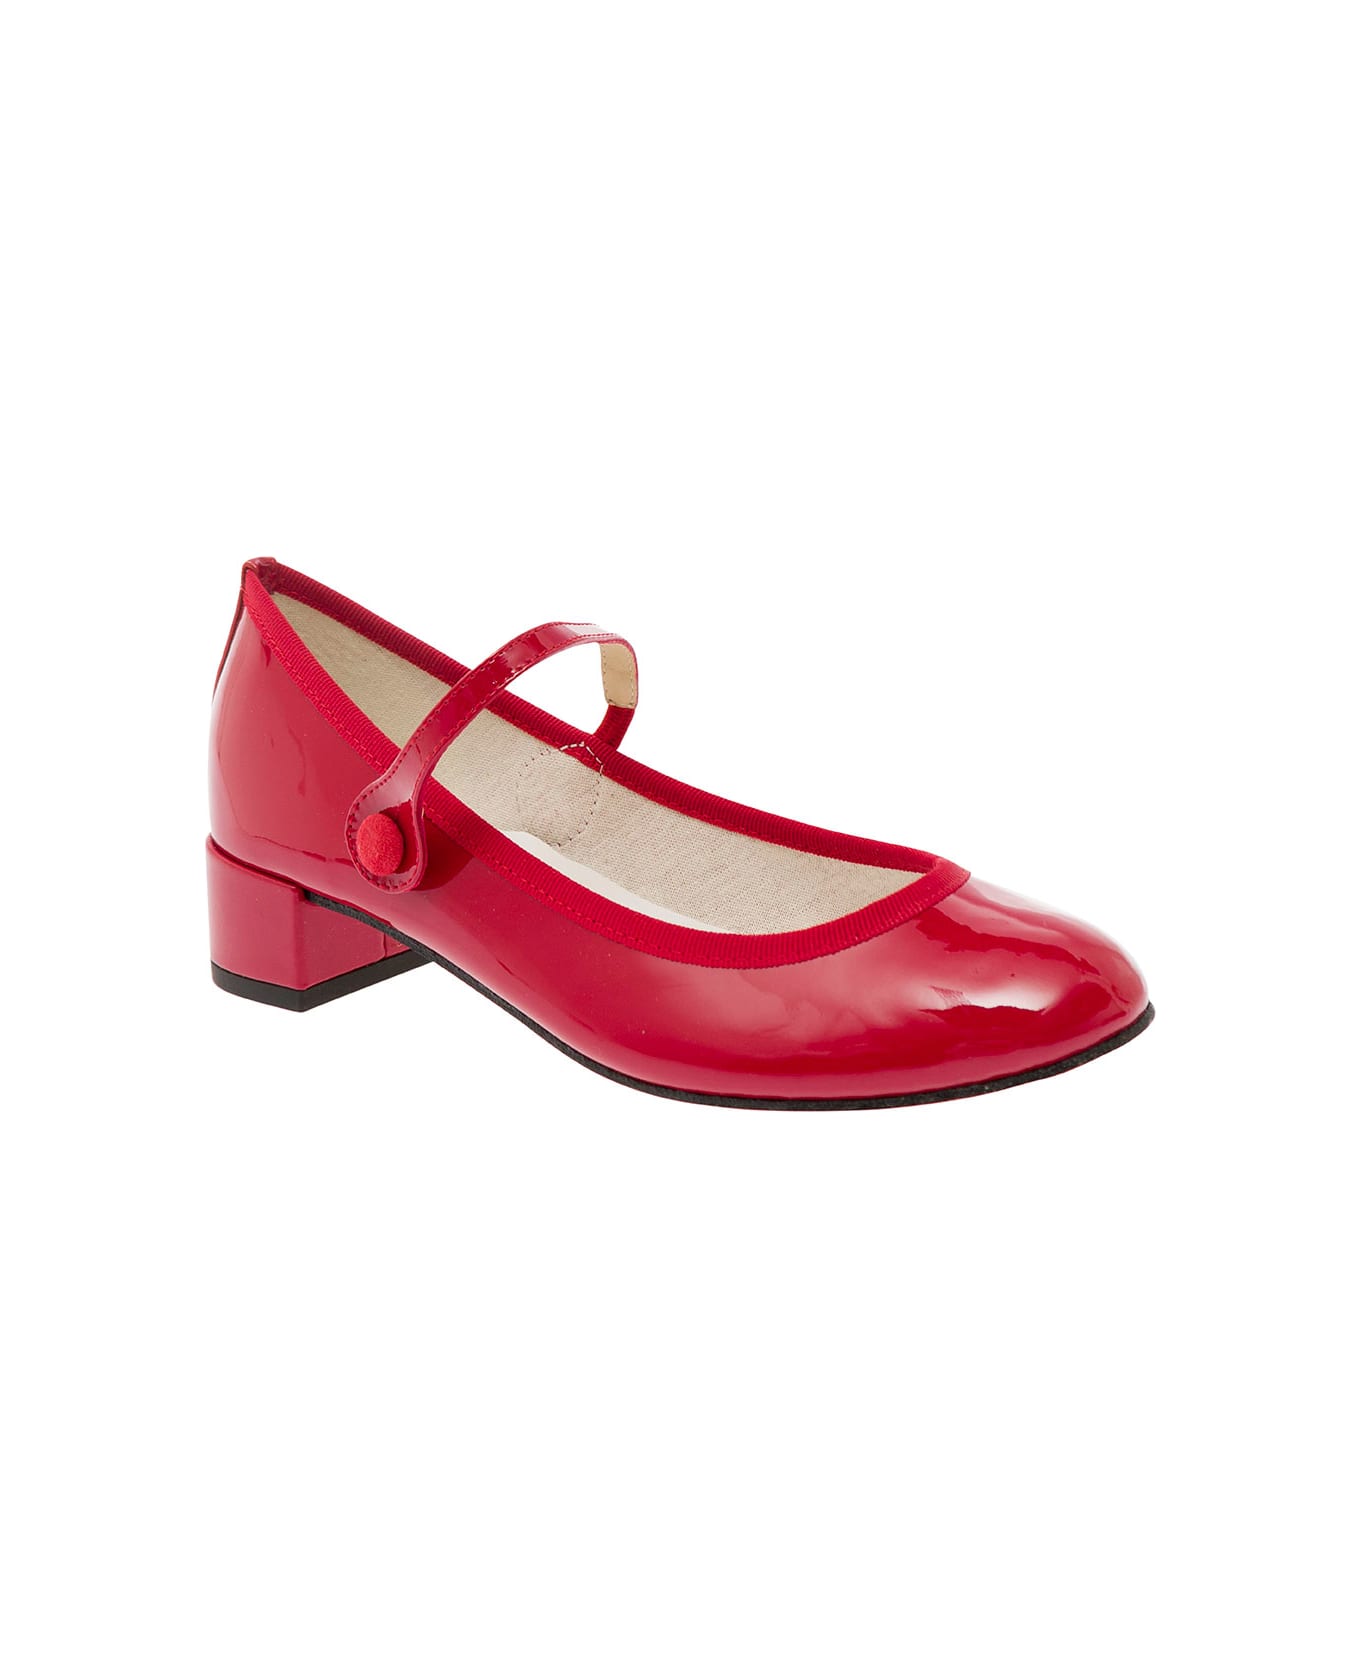 Repetto 'rose' Red Mary Janes With Strap In Patent Leather Woman - Red ハイヒール